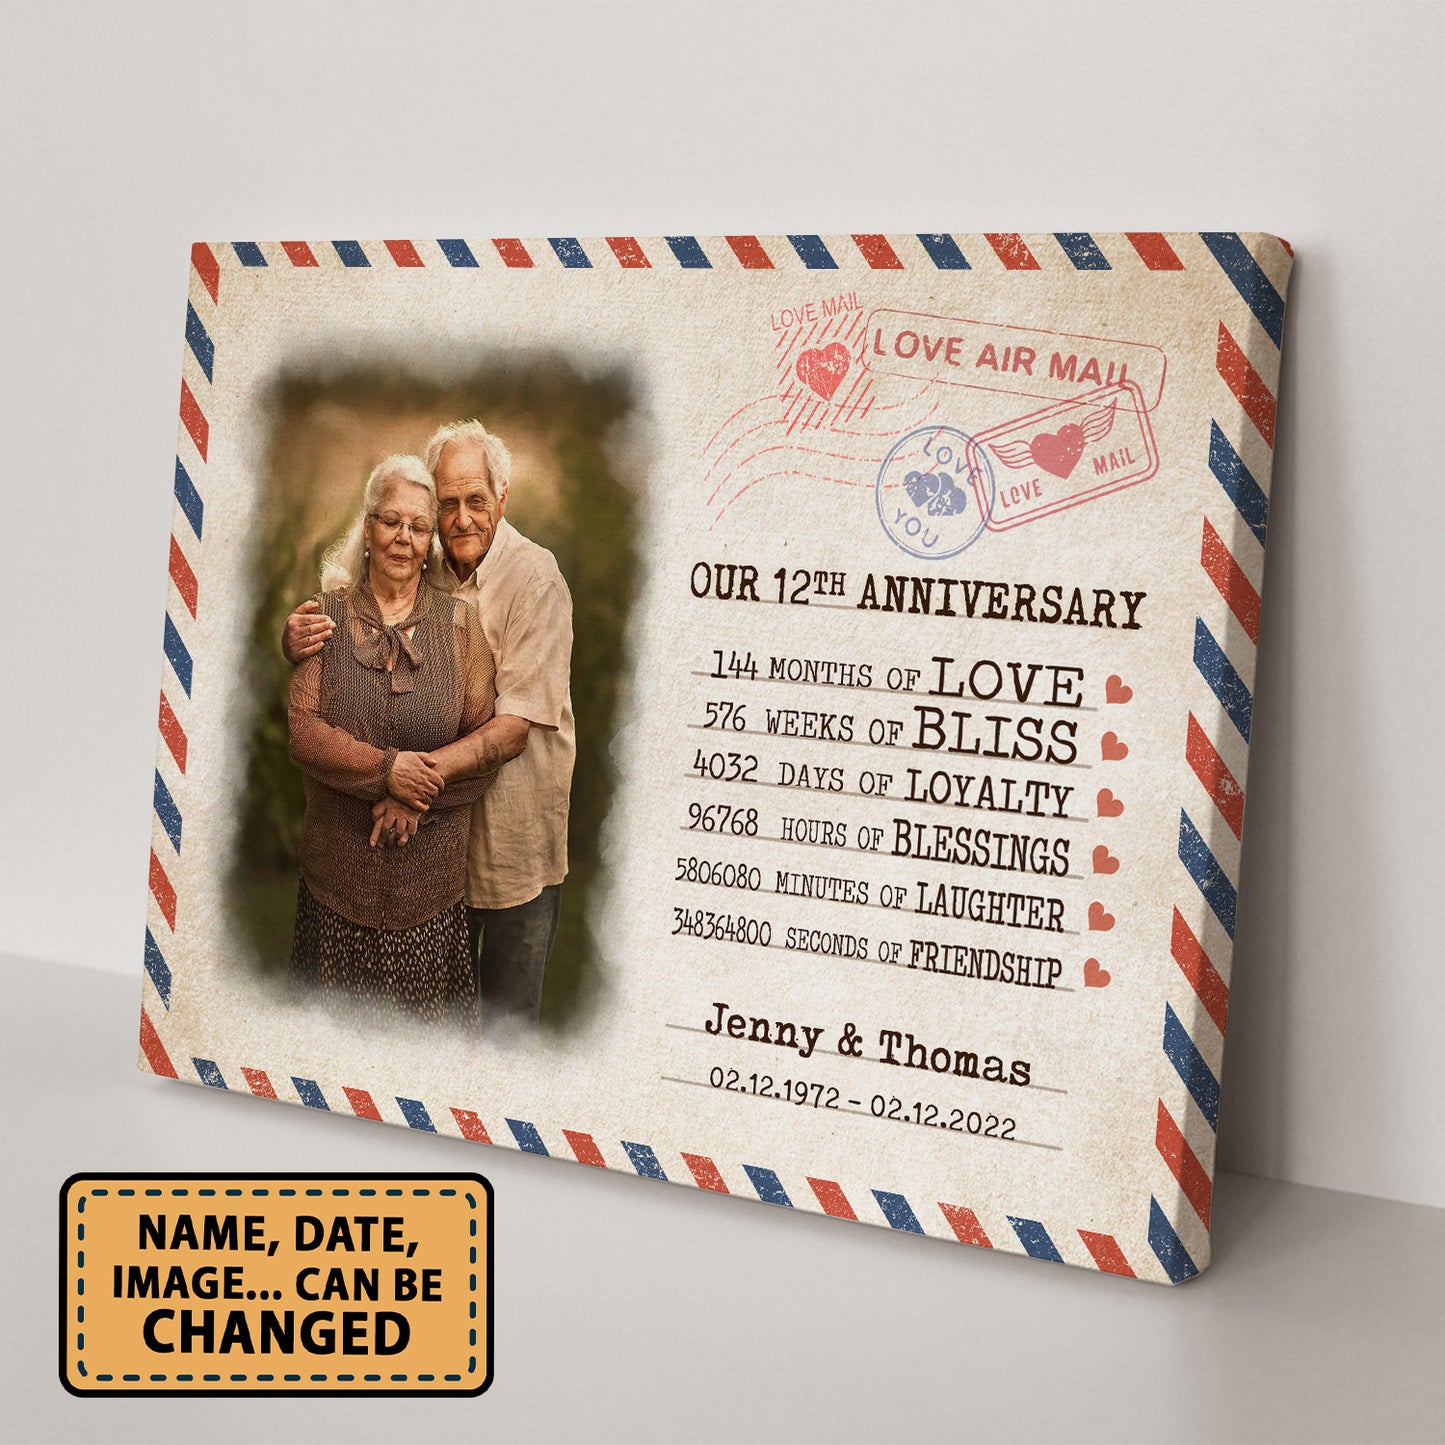 Our 12th Anniversary Letter Valentine Gift Personalized Canvas